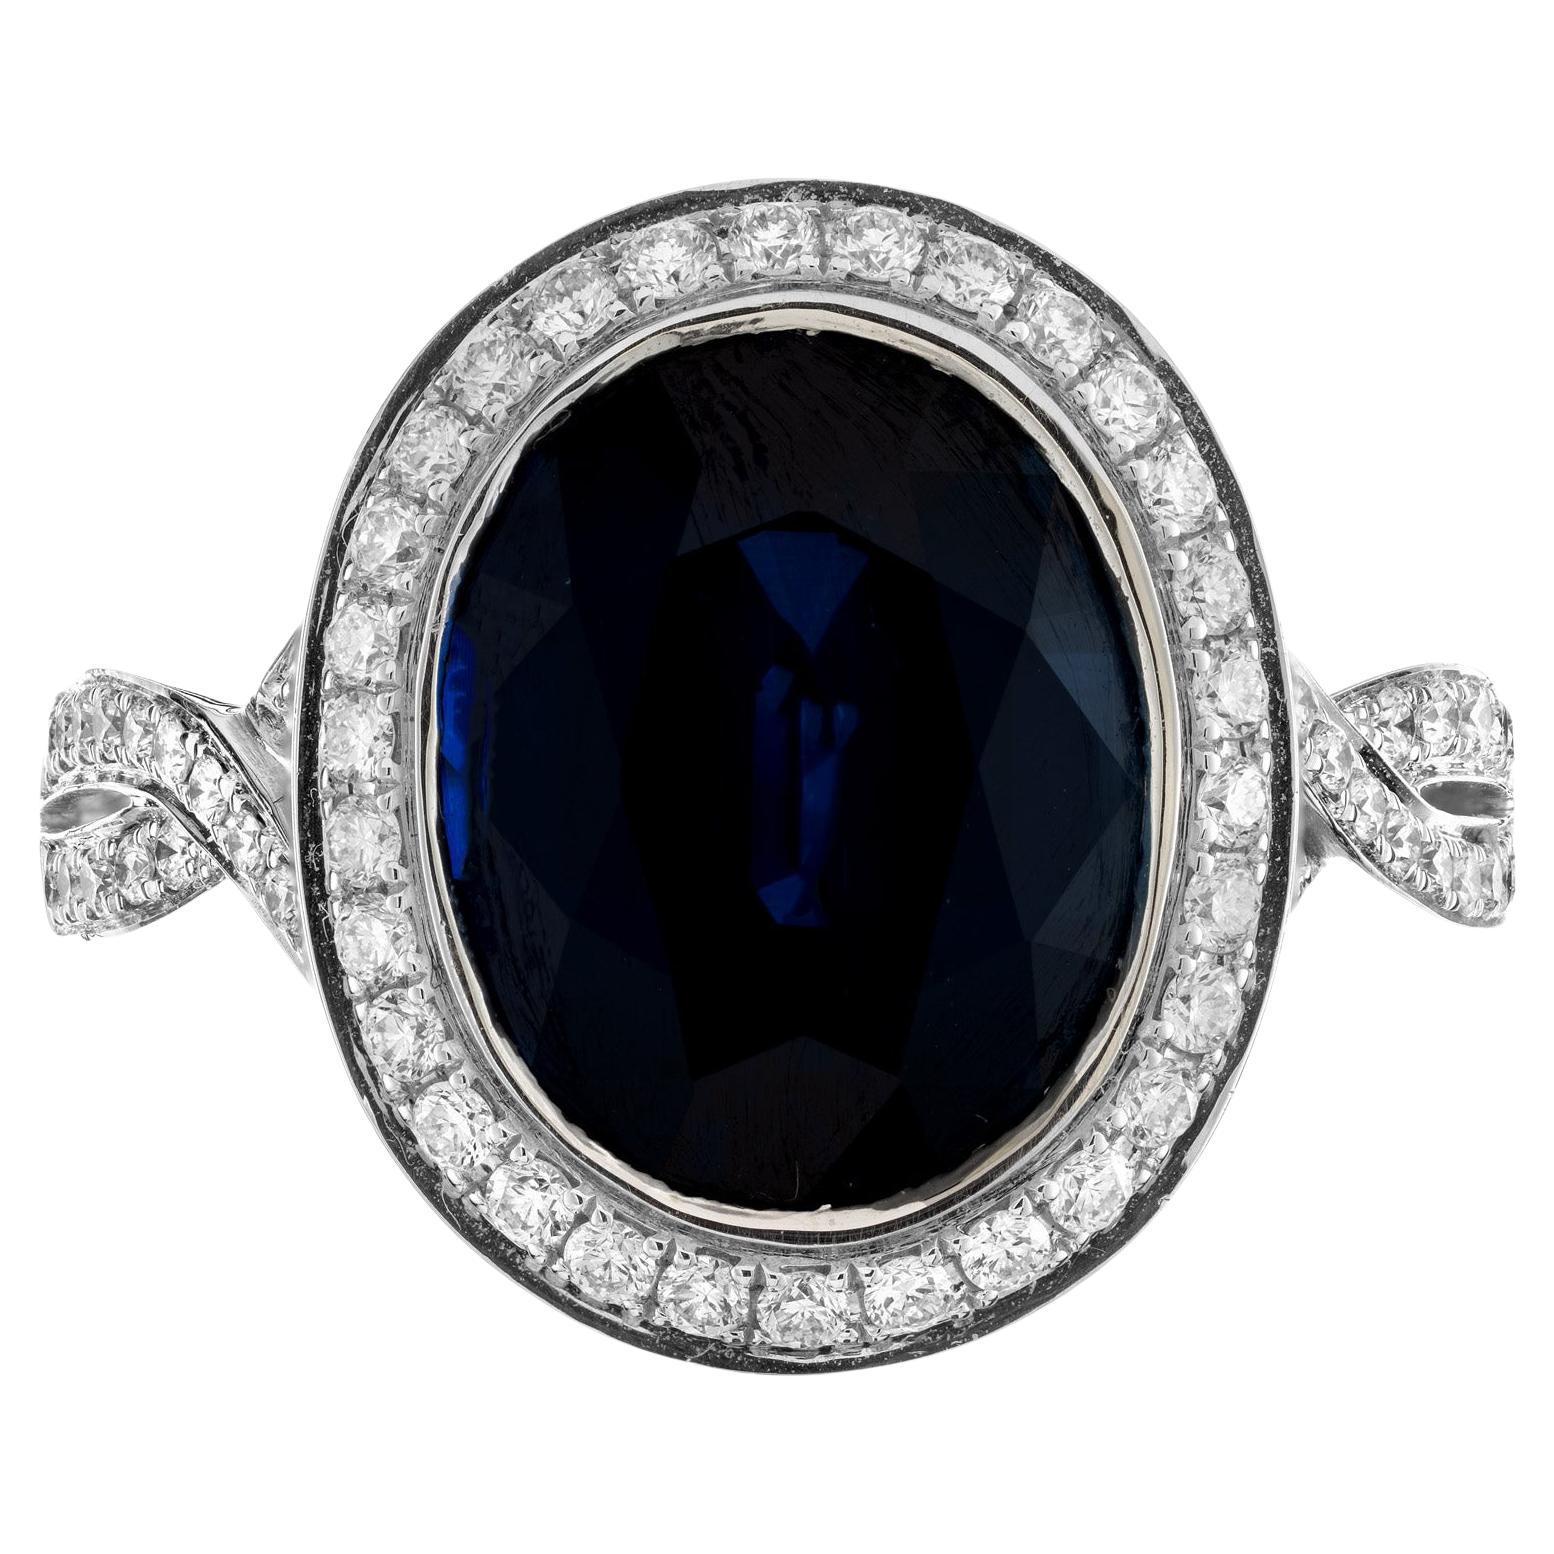 Peter Suchy GIA 6.50 Carat Oval Blue Sapphire Diamond Gold Engagement aRing For Sale